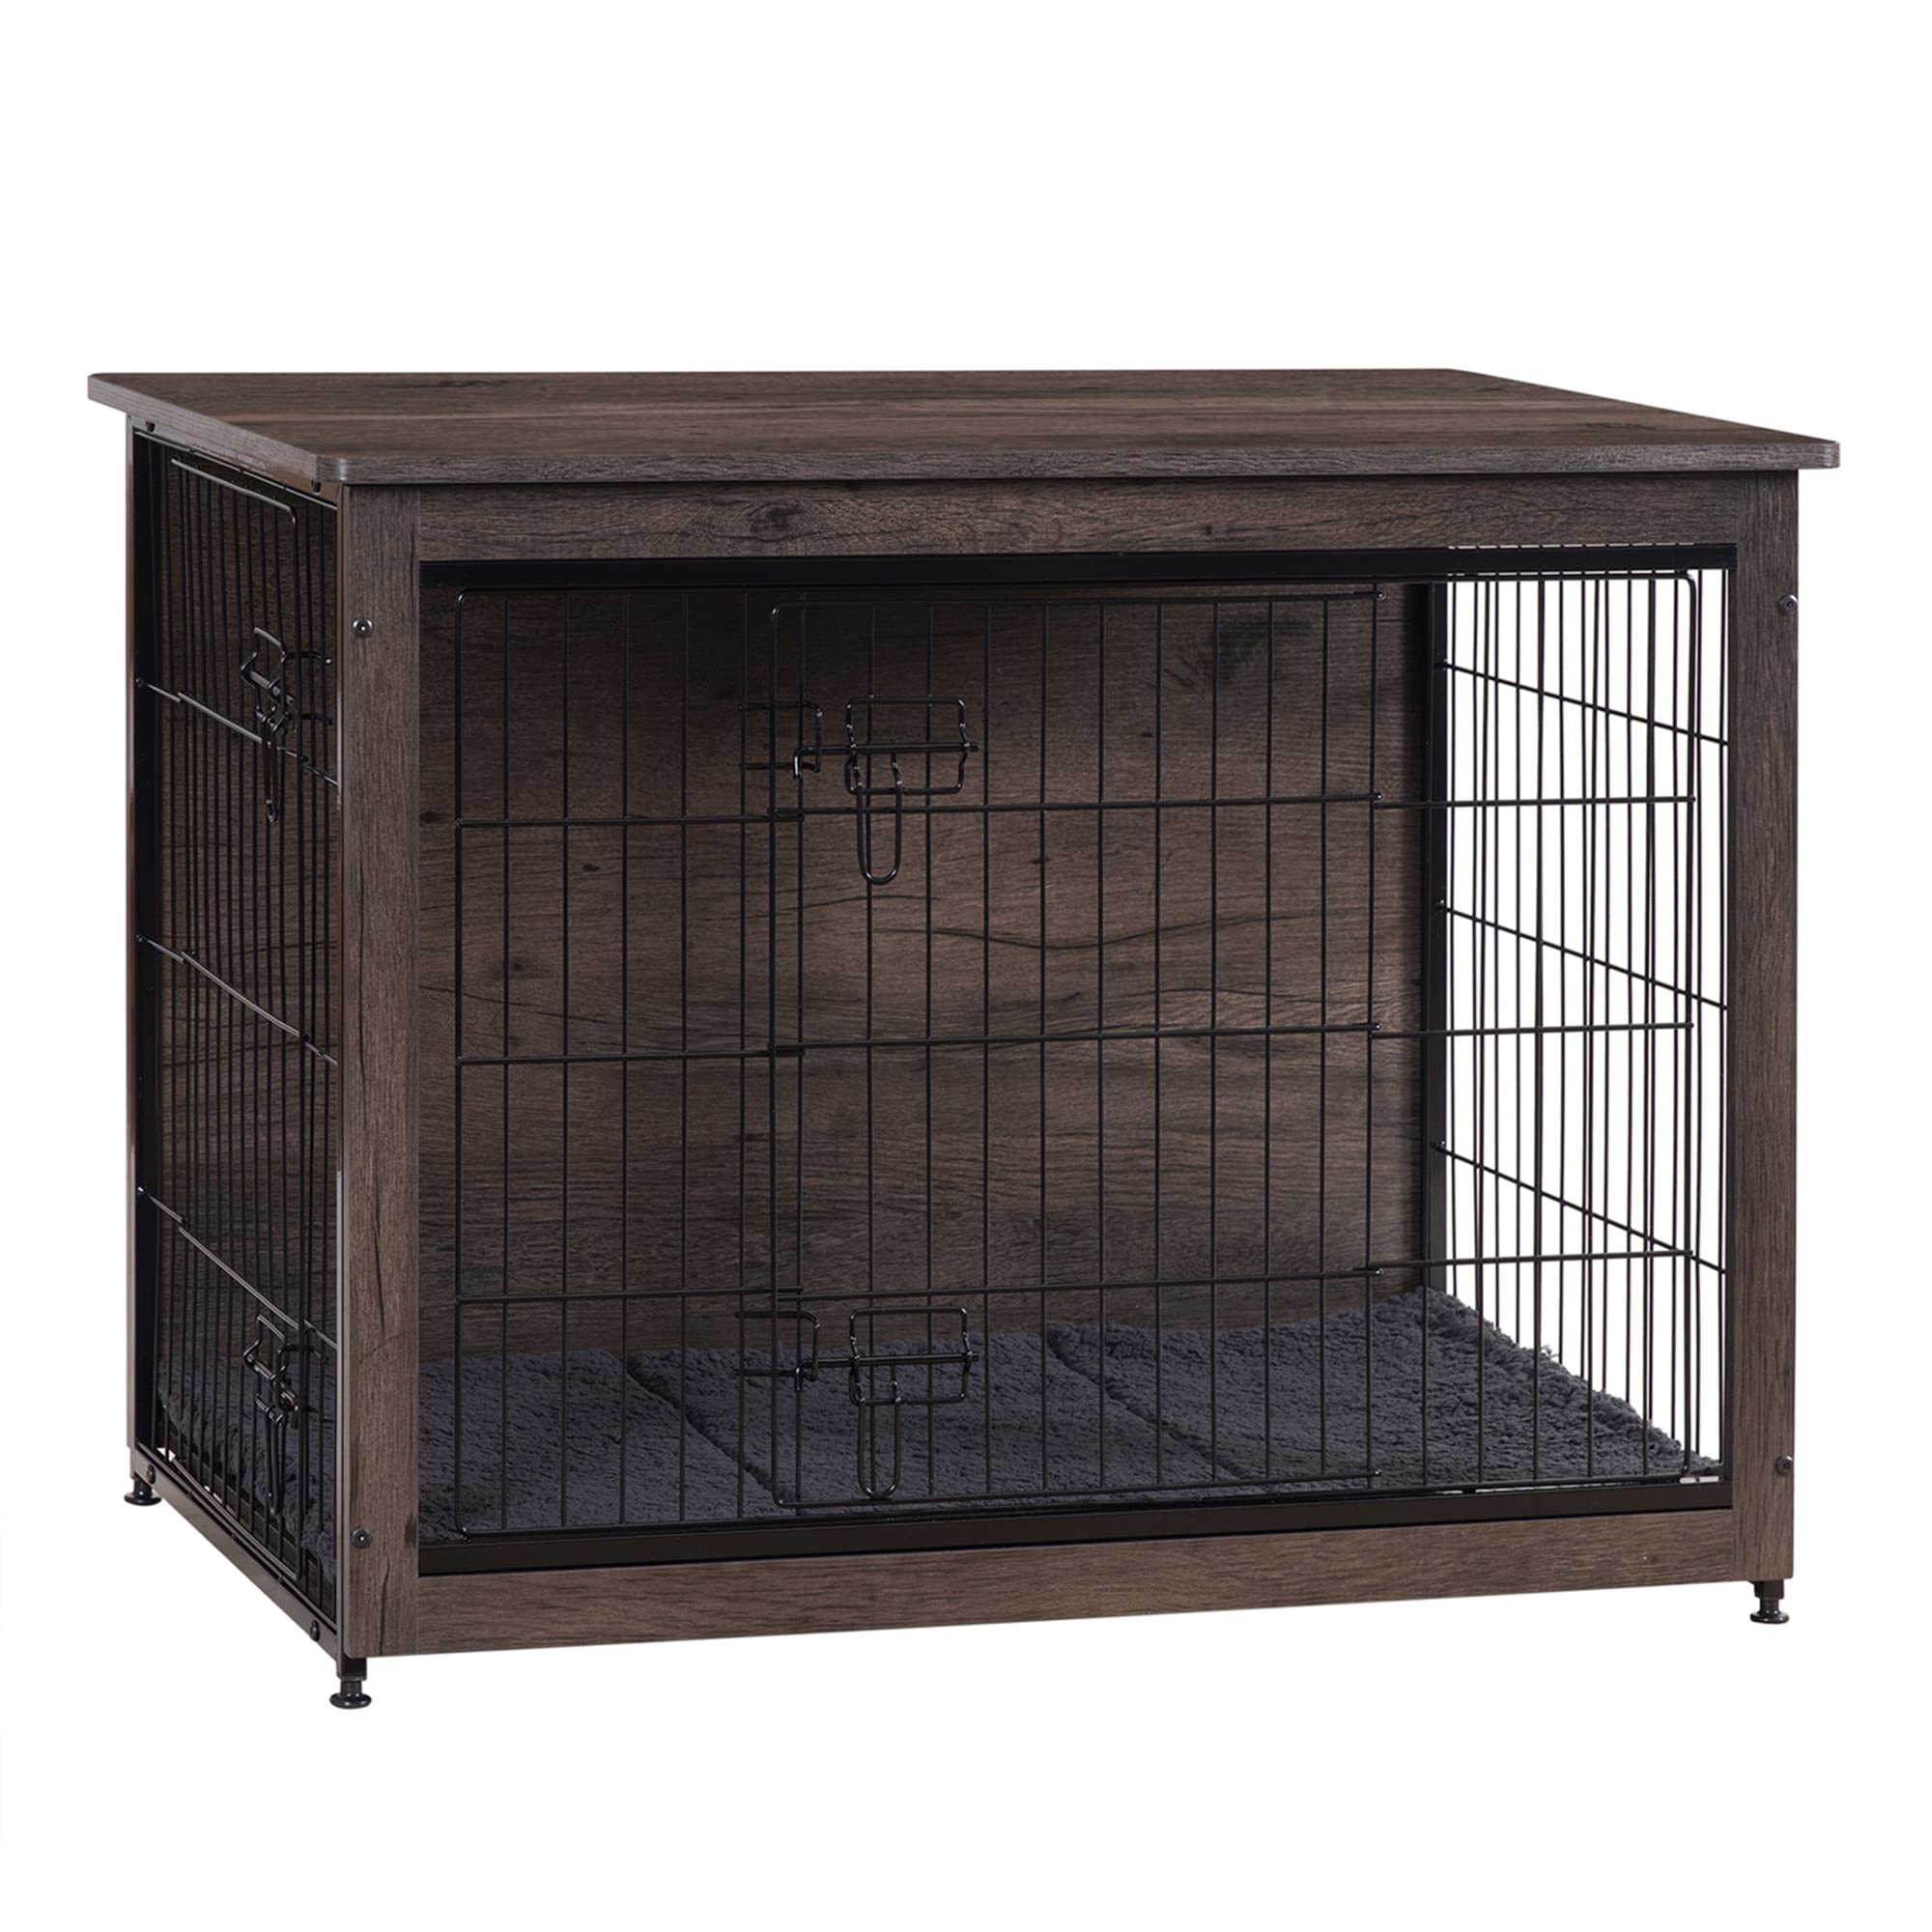 DWANTON Dog crate Furniture with cushion Medium Wooden Dog crate with Double Doors Dog Furniture Indoor Dog Kennel End Table 32.